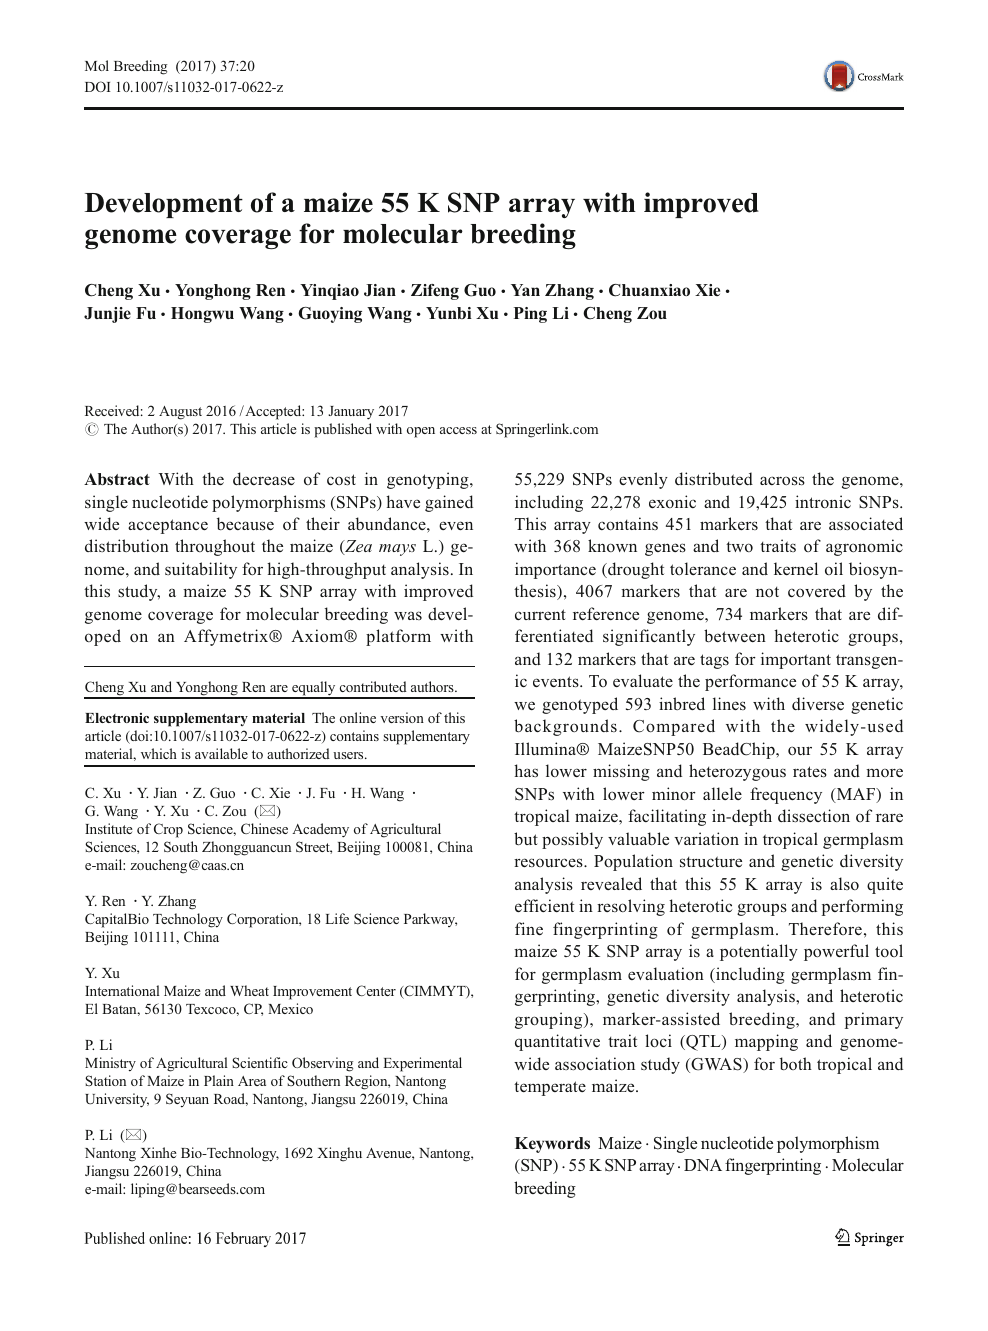 Development Of A Maize 55 K Snp Array With Improved Genome Coverage For Molecular Breeding Topic Of Research Paper In Biological Sciences Download Scholarly Article Pdf And Read For Free On